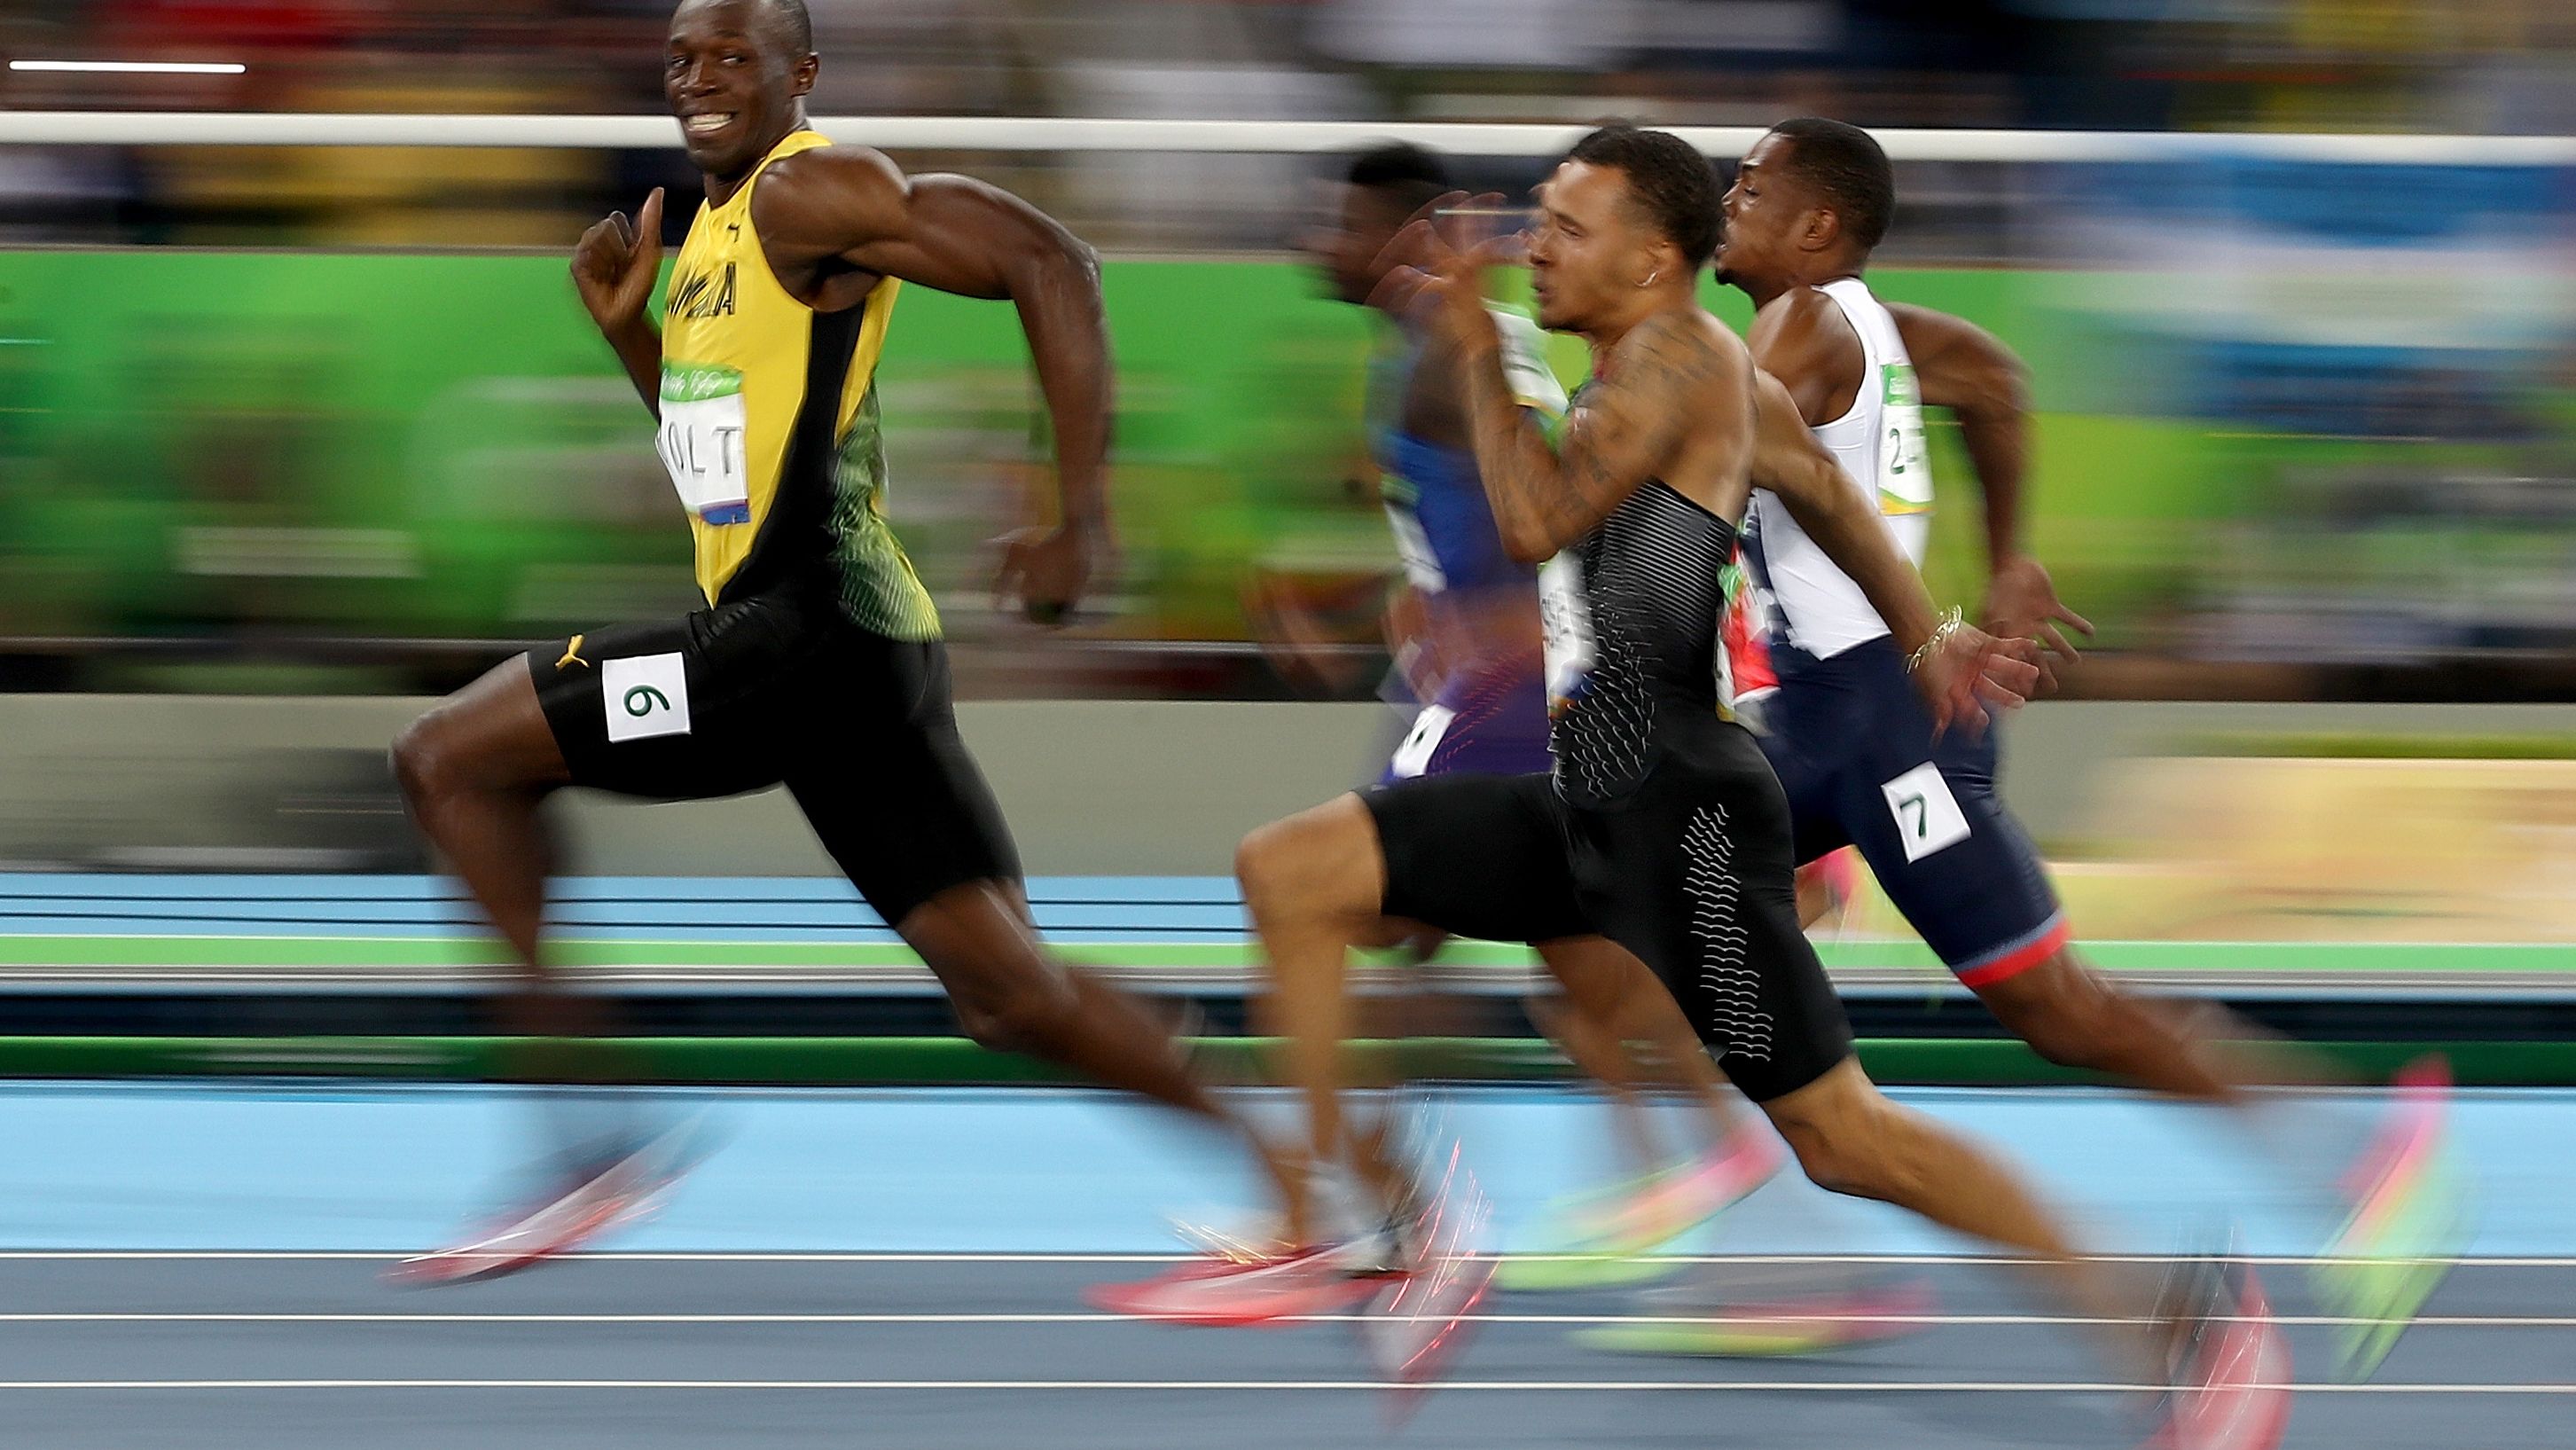 The iconic image of Bolt while competing in the men's 100m in Rio